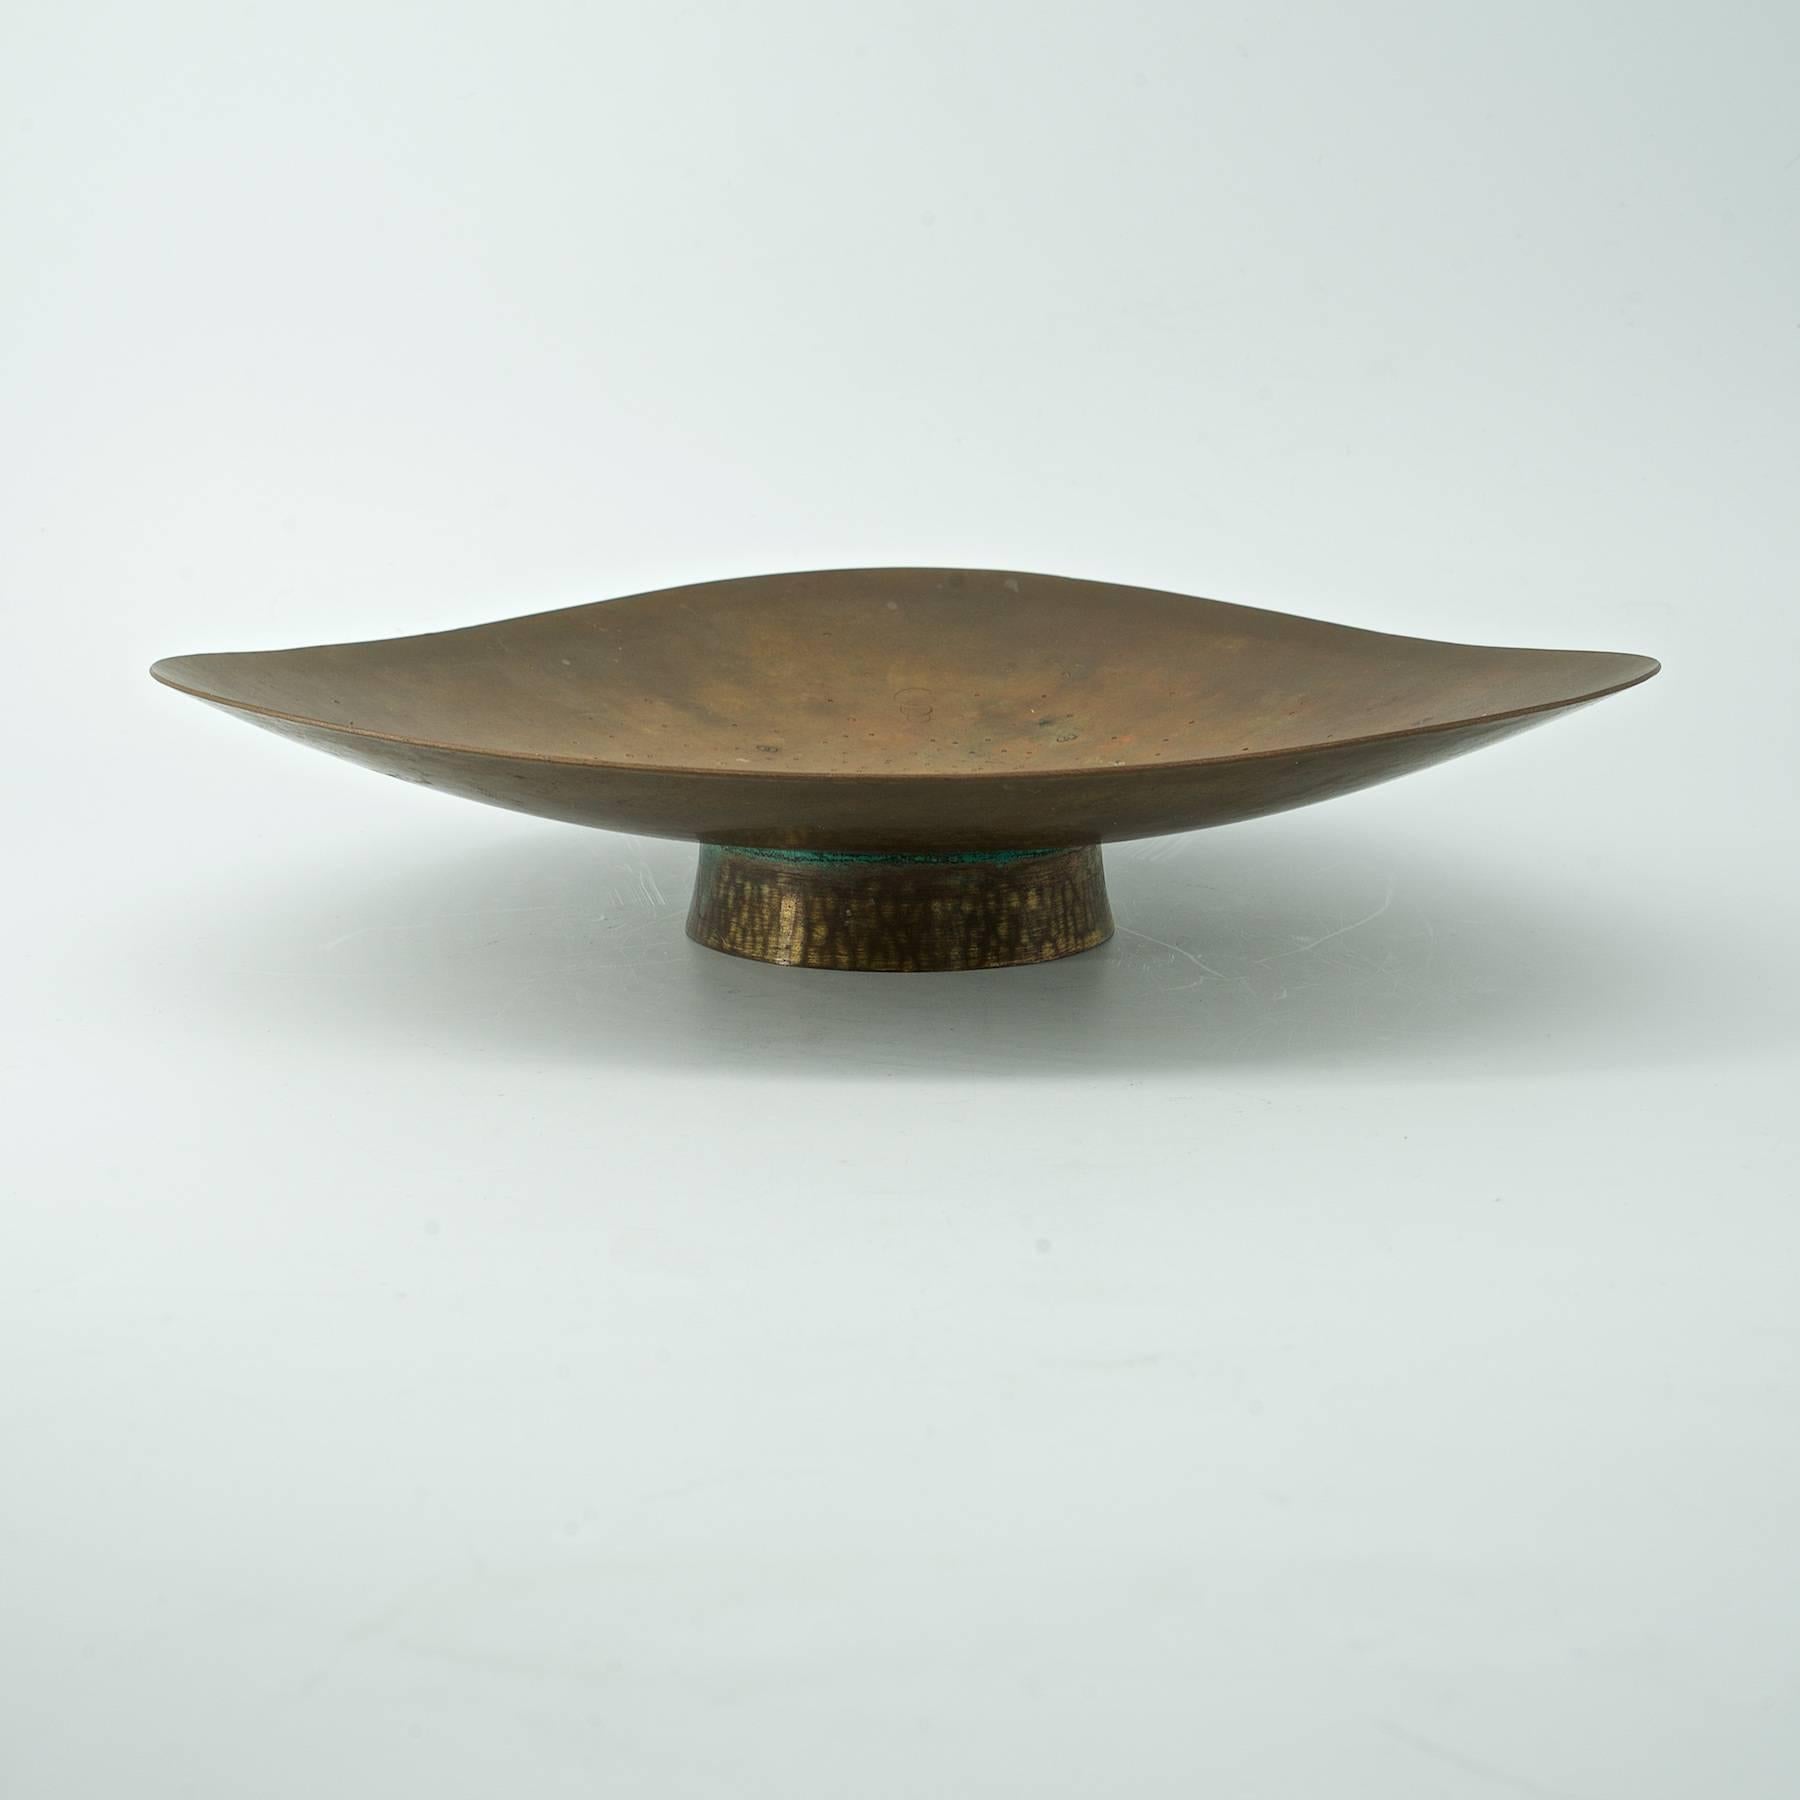 Patinated 1930s Hayno Focken No.1042 Triangle Brass Footed Bowl Dish Midcentury Pearson